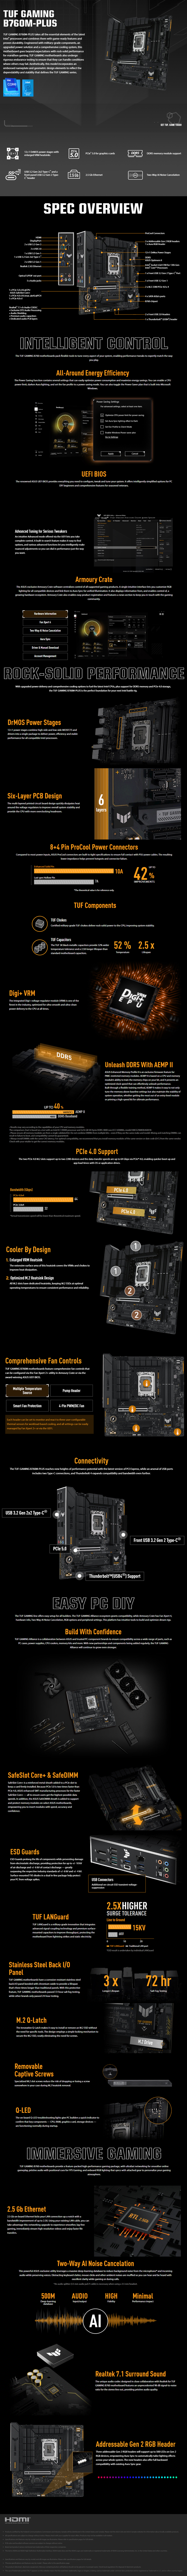 A large marketing image providing additional information about the product ASUS TUF Gaming B760M-Plus LGA1700 mATX Desktop Motherboard - Additional alt info not provided